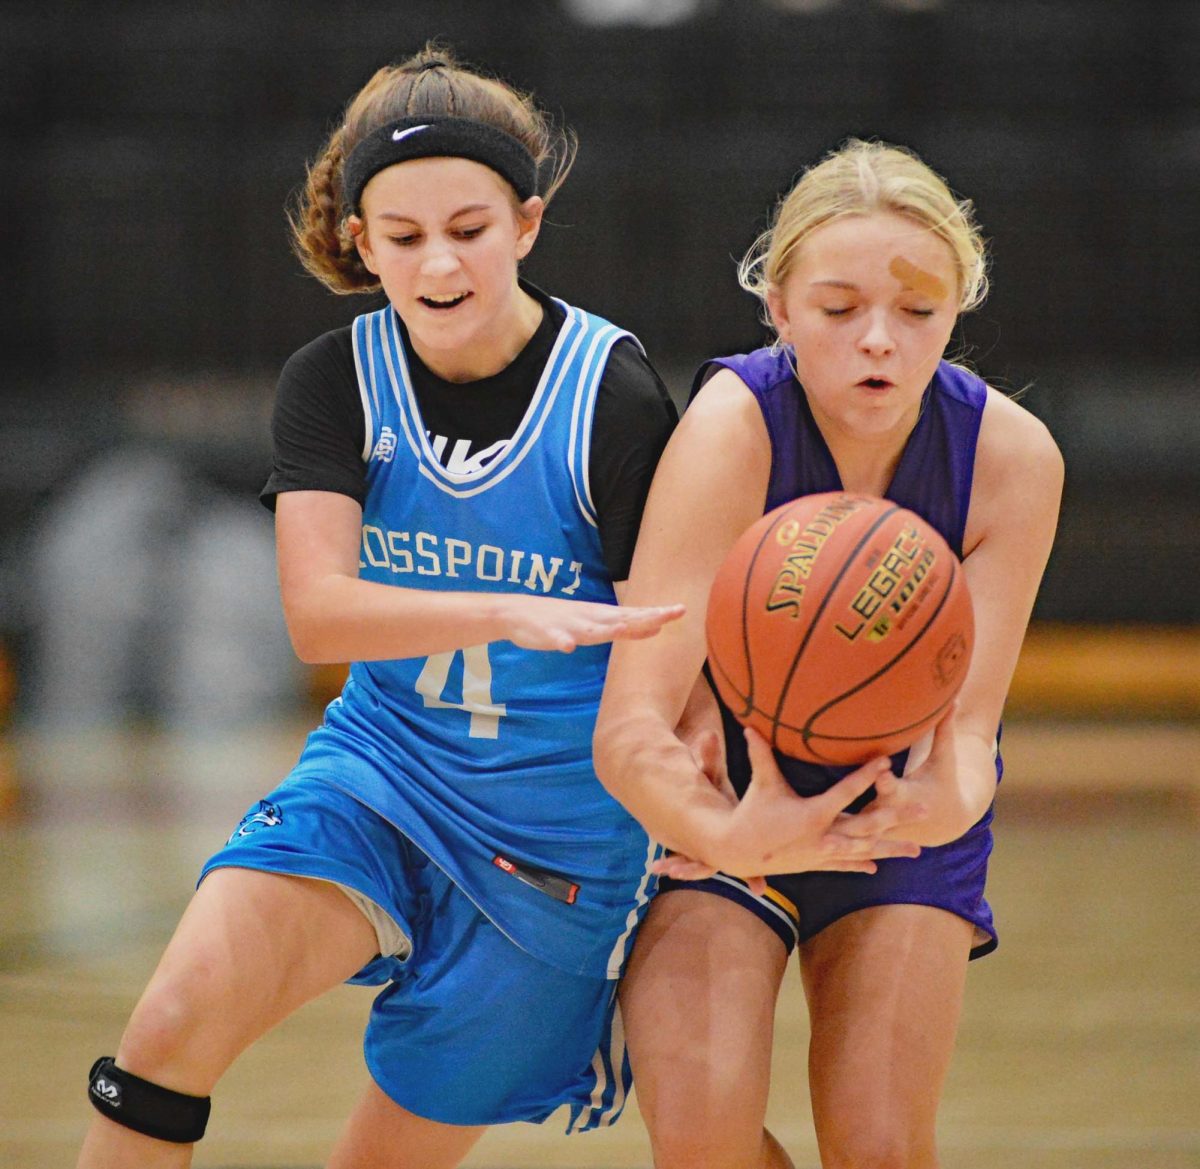 Rosspoints Reagan Clem and Wallins Brooklyn Haywood went after a loose ball in the seventh- and eighth-grade county finals Thursday.